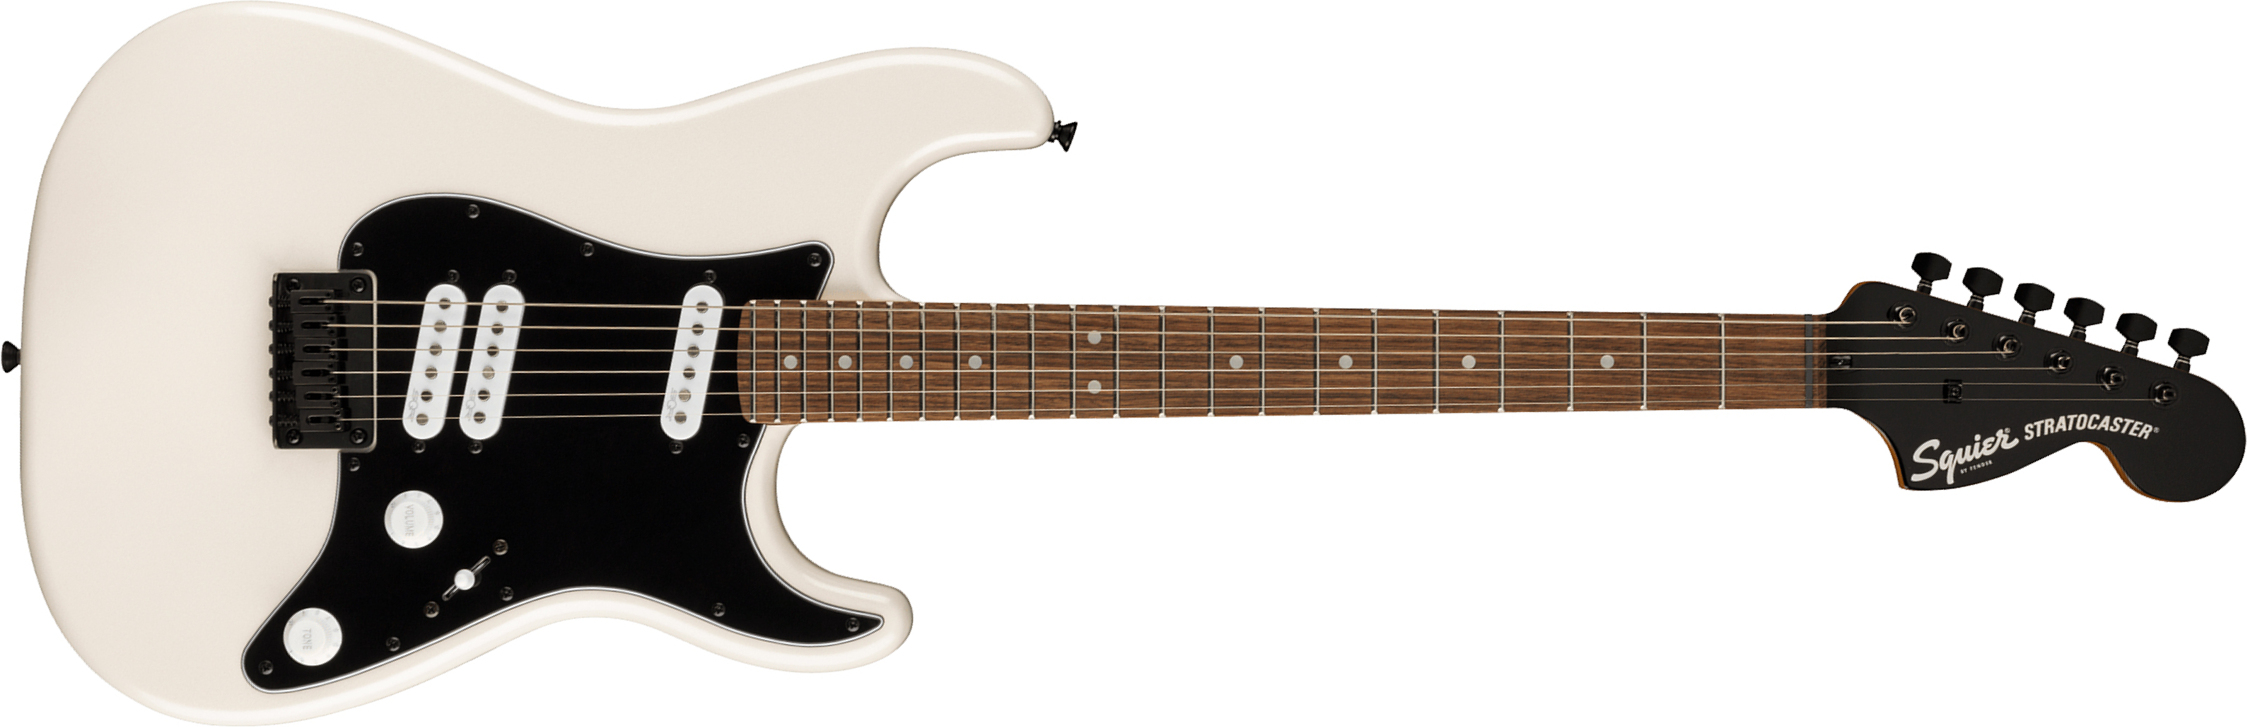 Squier Strat Contemporary Special Ht Sss Lau - Pearl White - Str shape electric guitar - Main picture